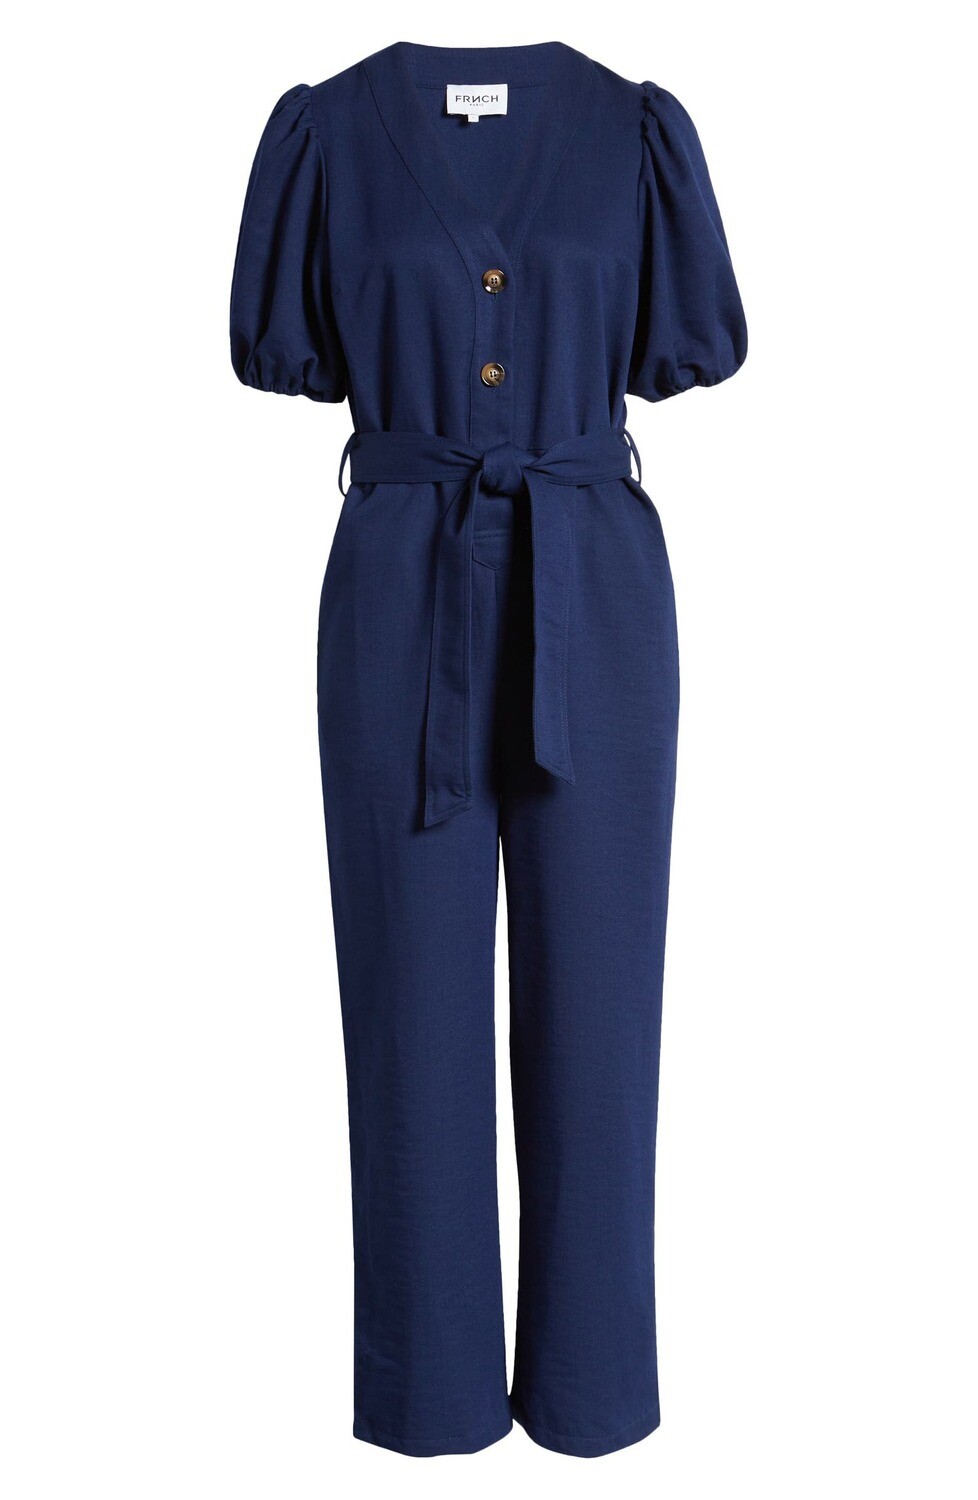 FRNCH - Laurine Jumpsuit